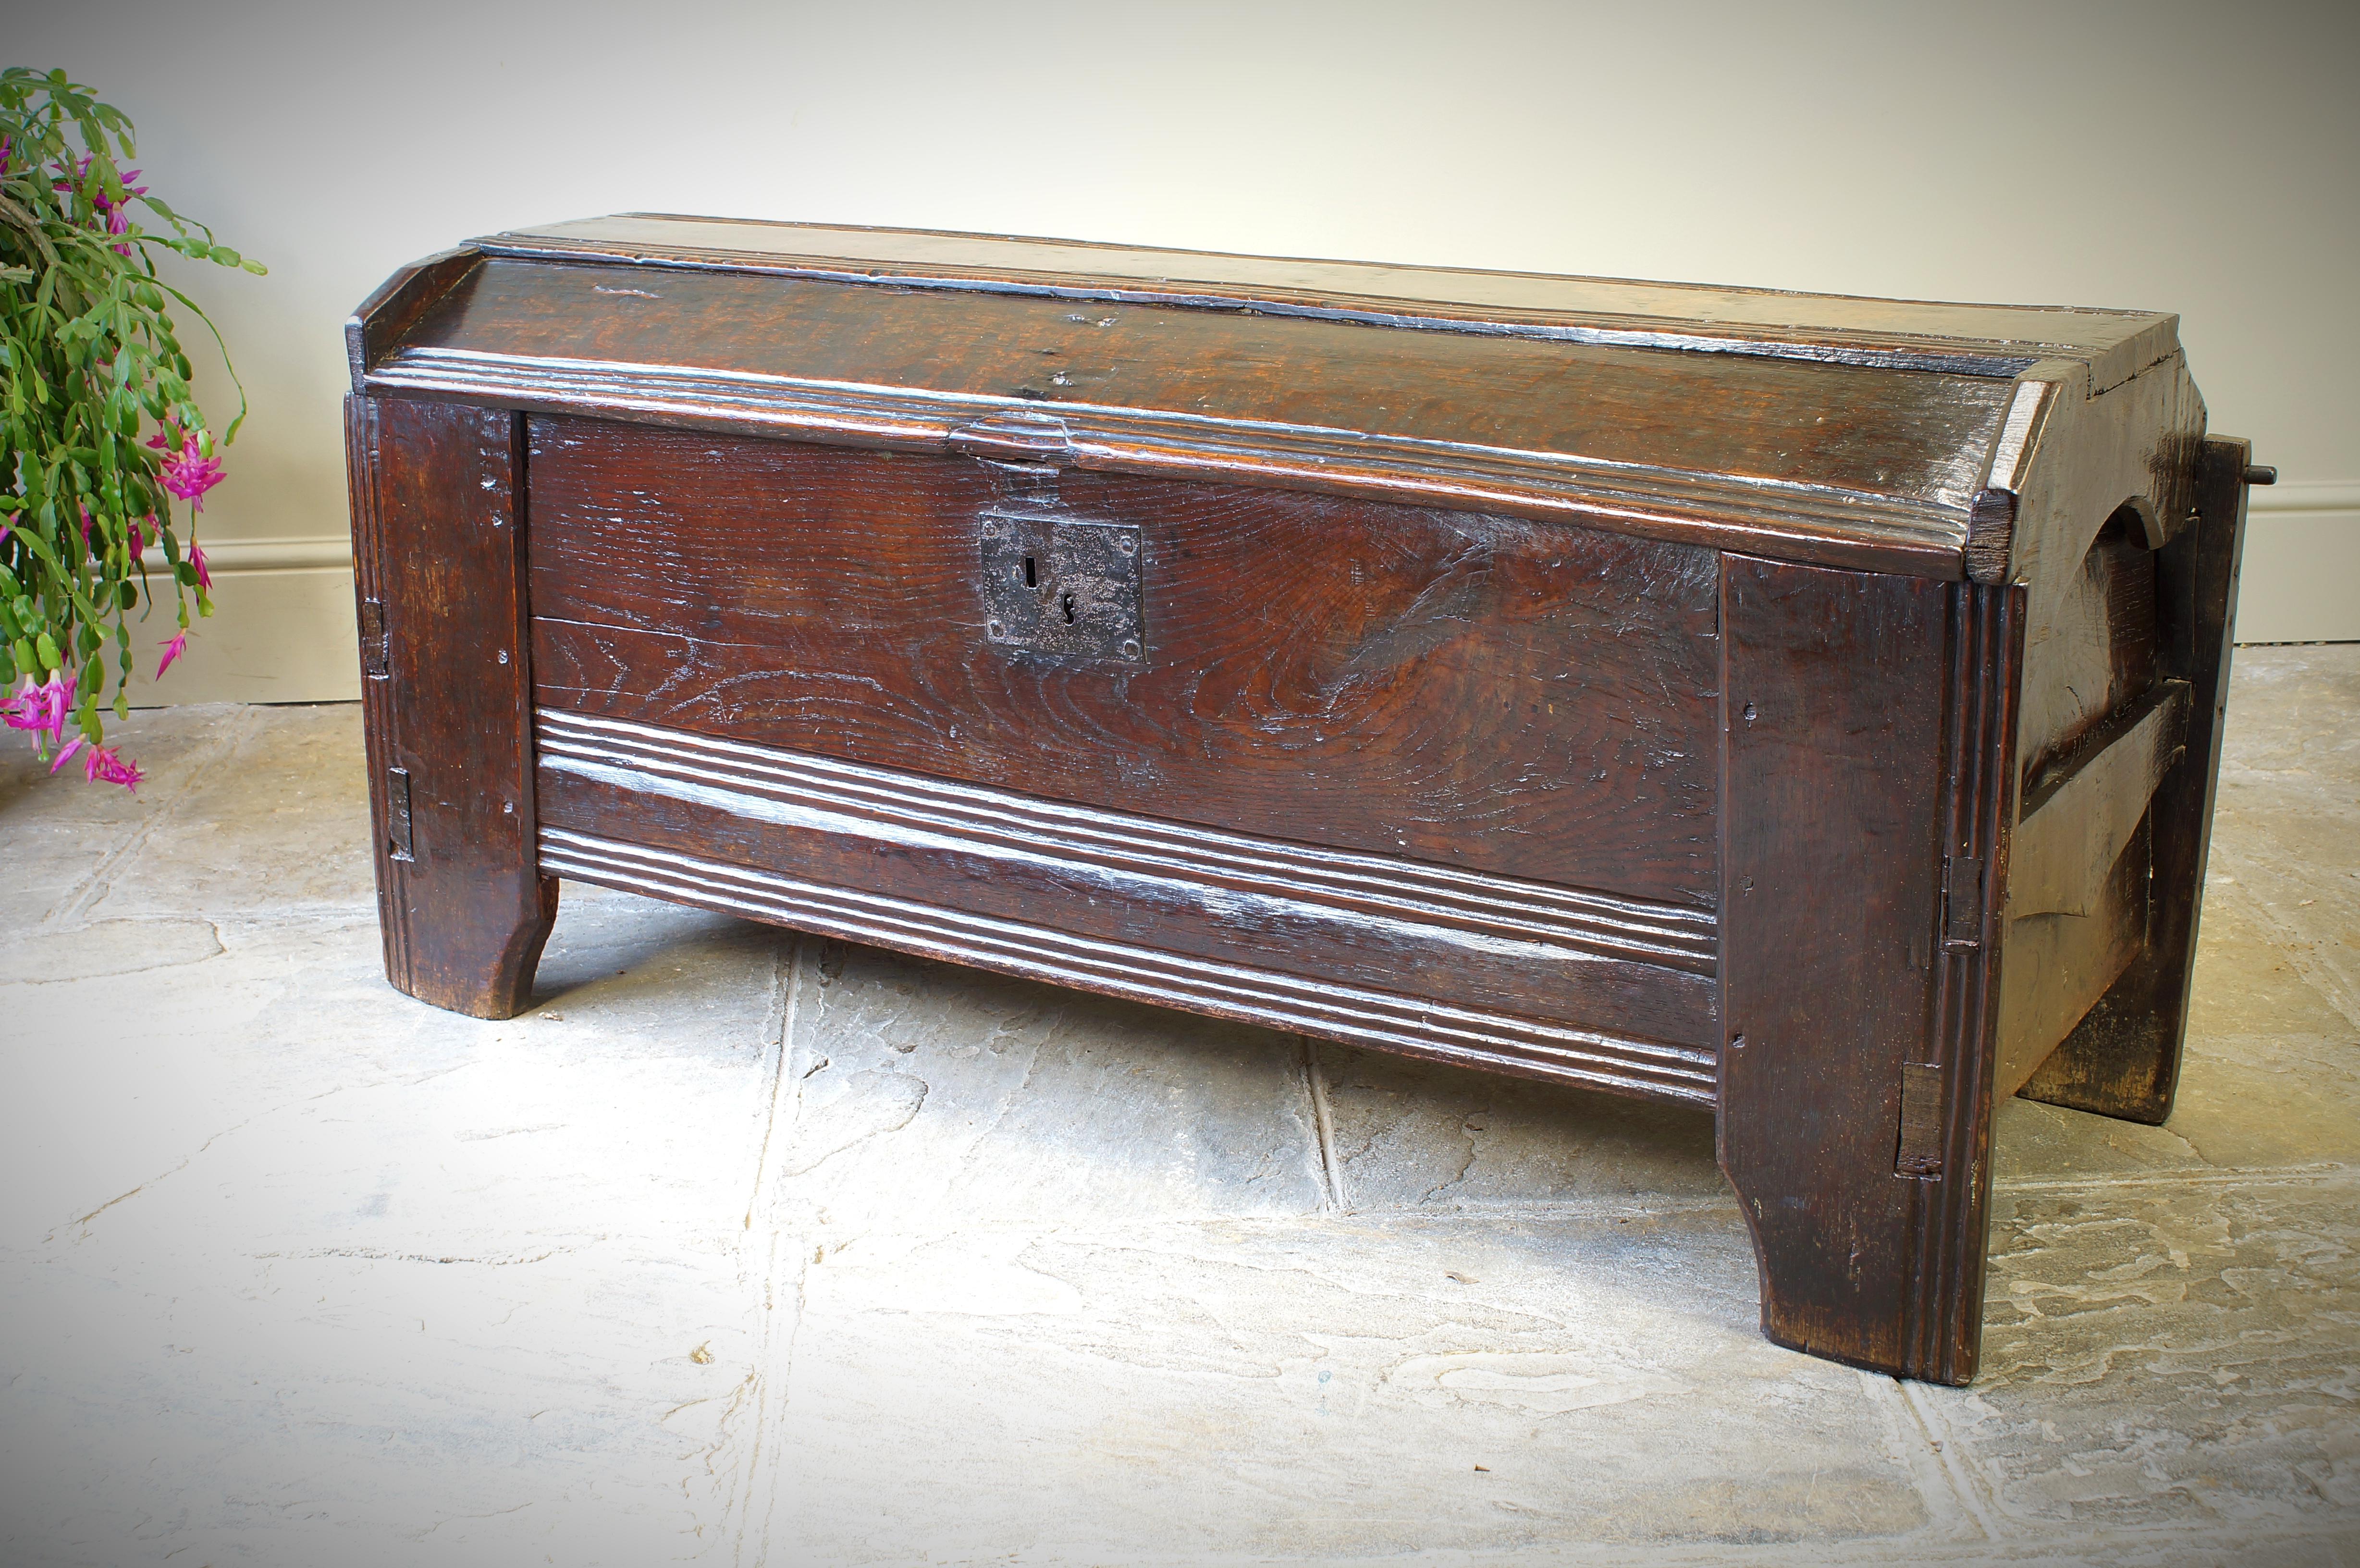 Tudor A 16th Century Boarded Oak Clamp-front Chest Or Ark, Welsh Borders, Circa 1550 For Sale